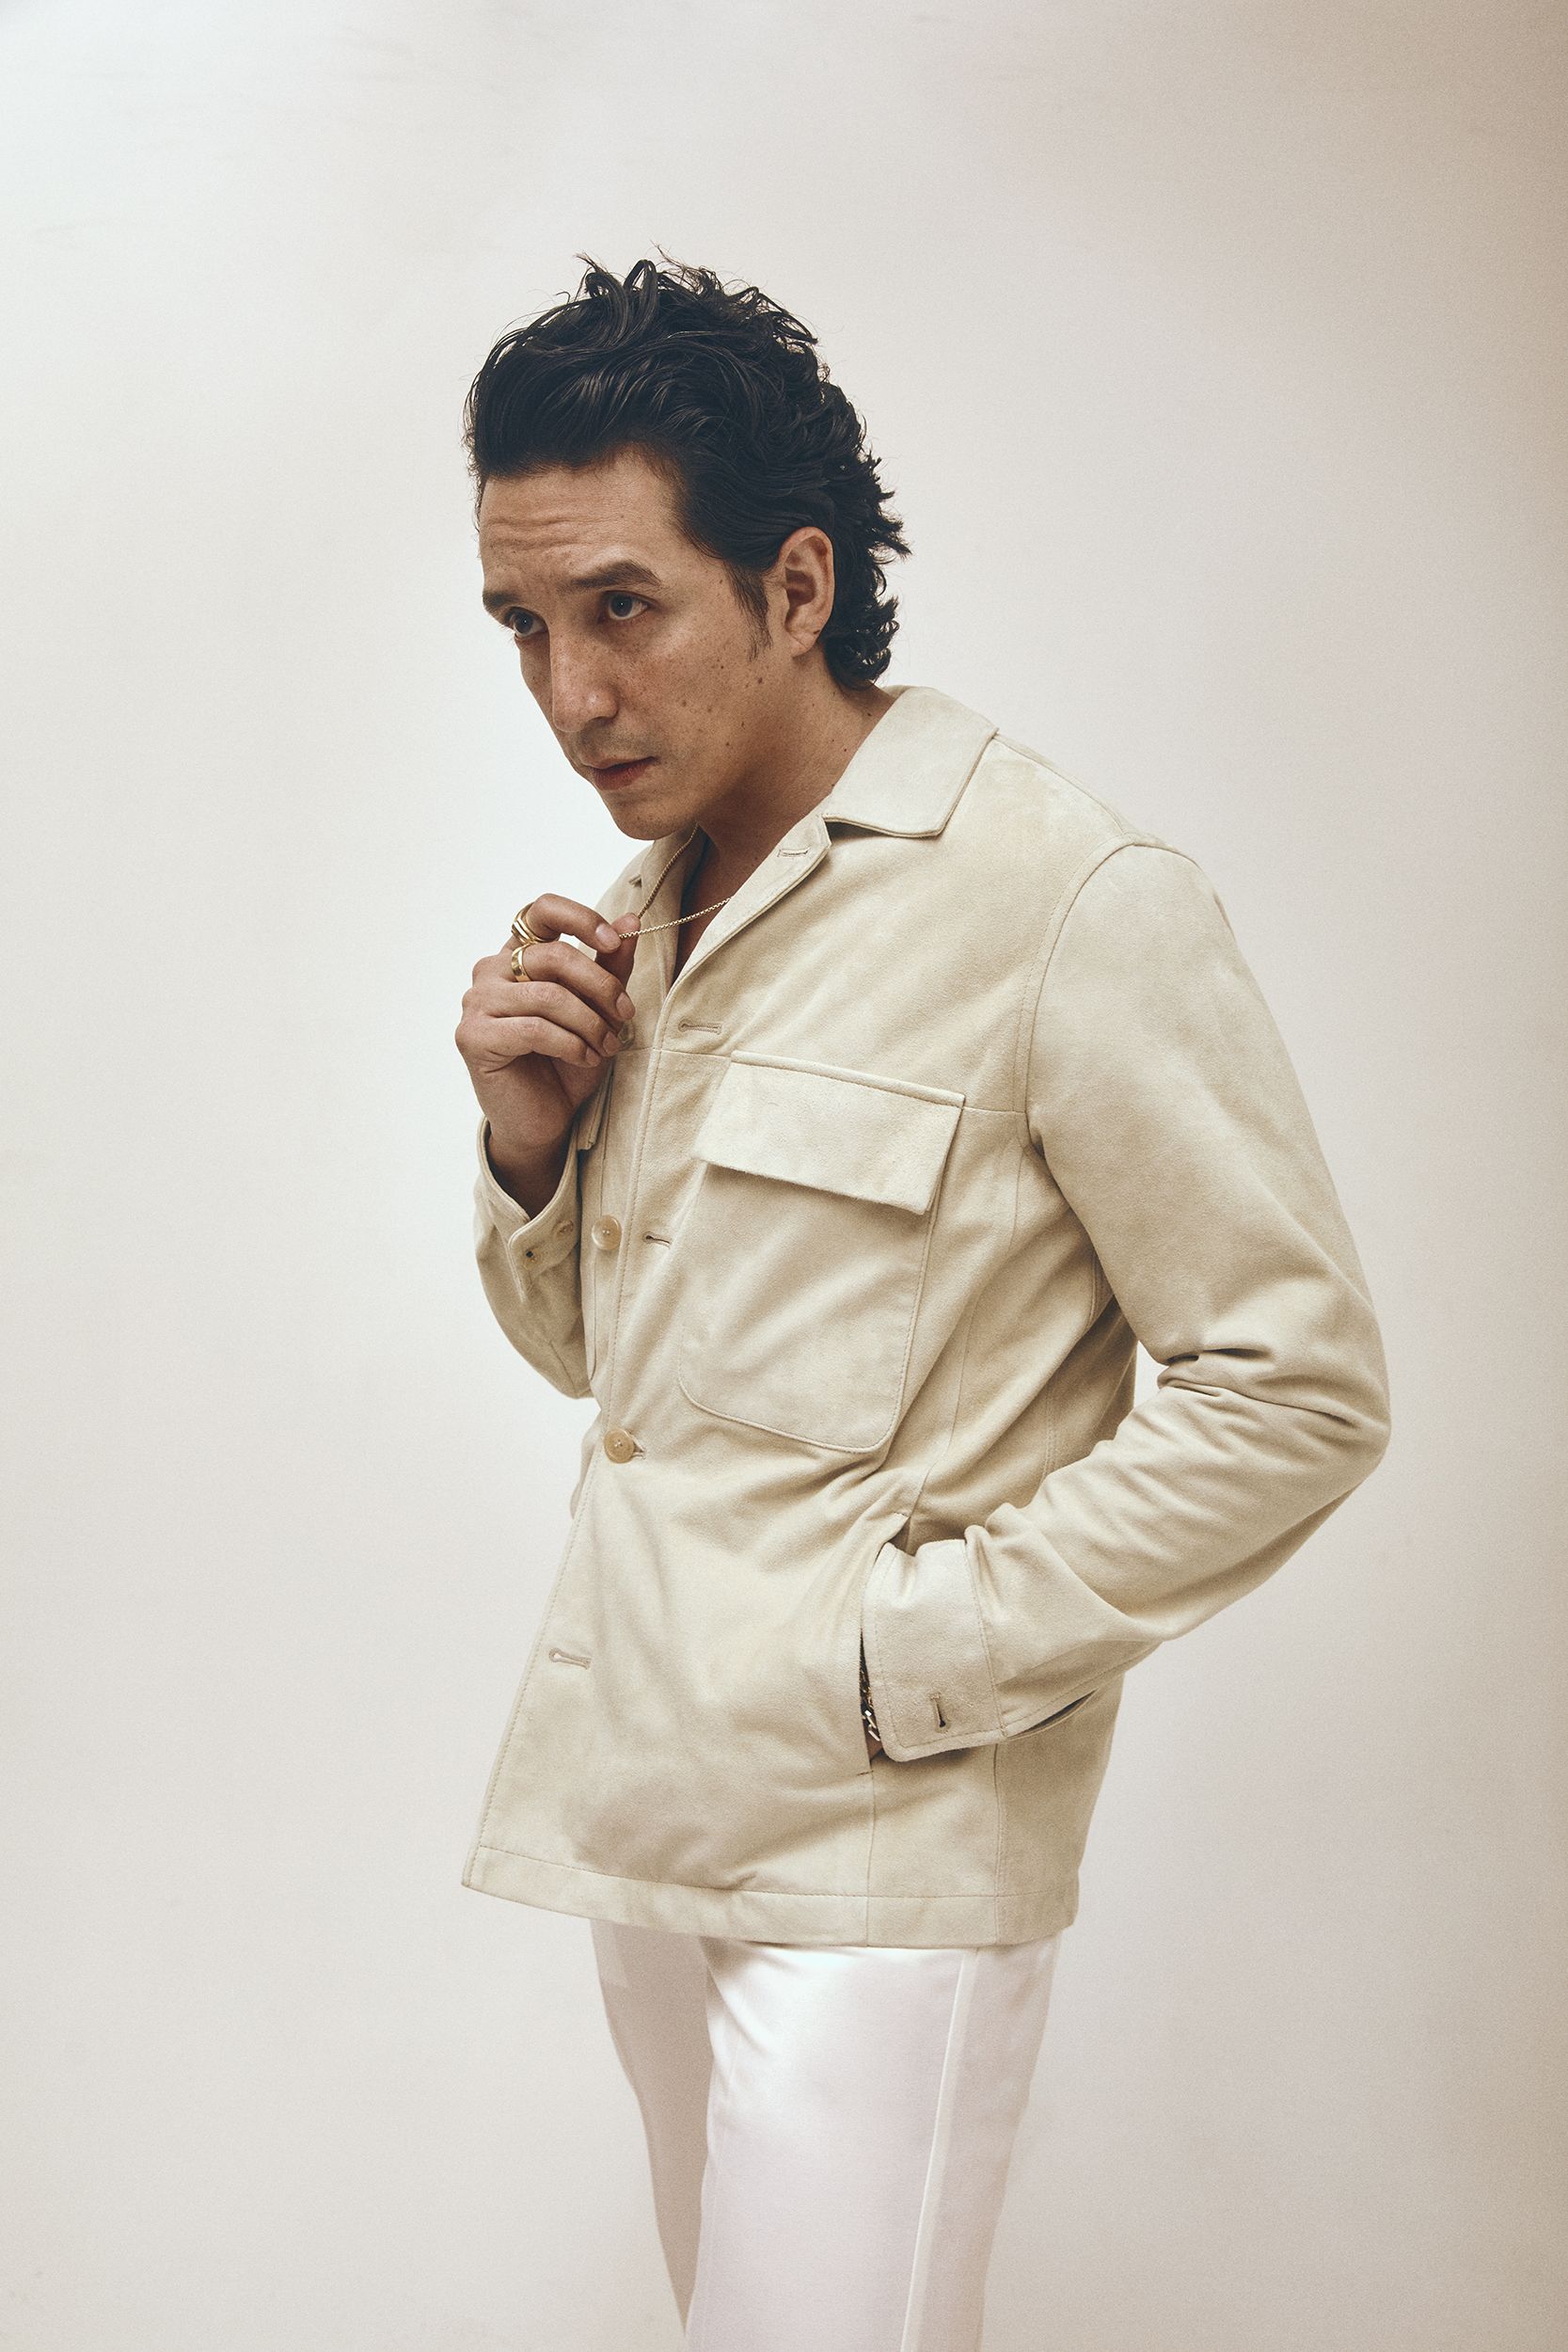 The Last of Us': Where Do You Know Tommy's Actor Gabriel Luna From?